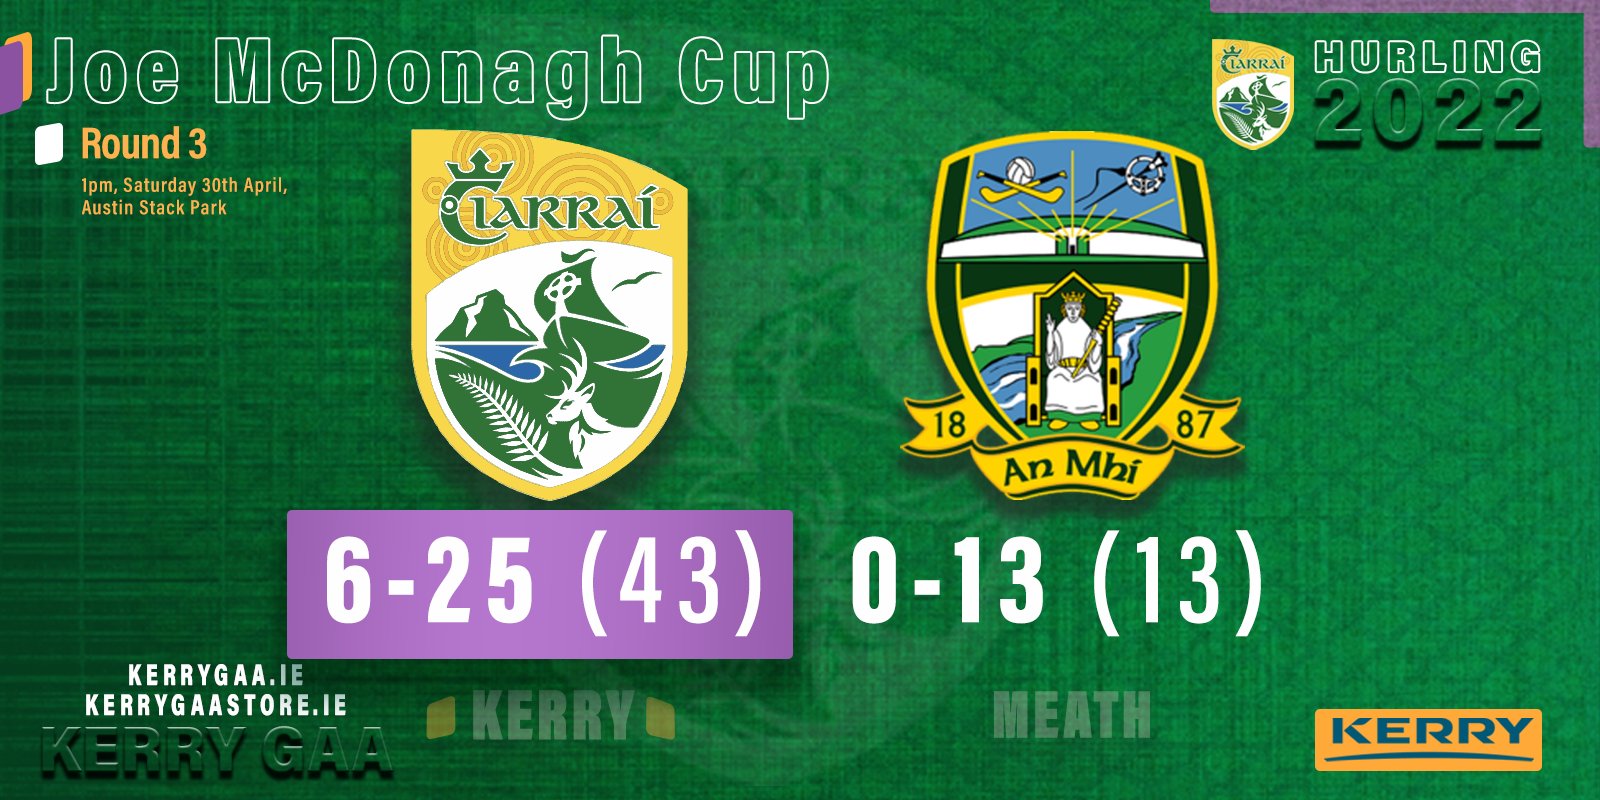 Kerry cruise to victory in Joe McDonagh Cup